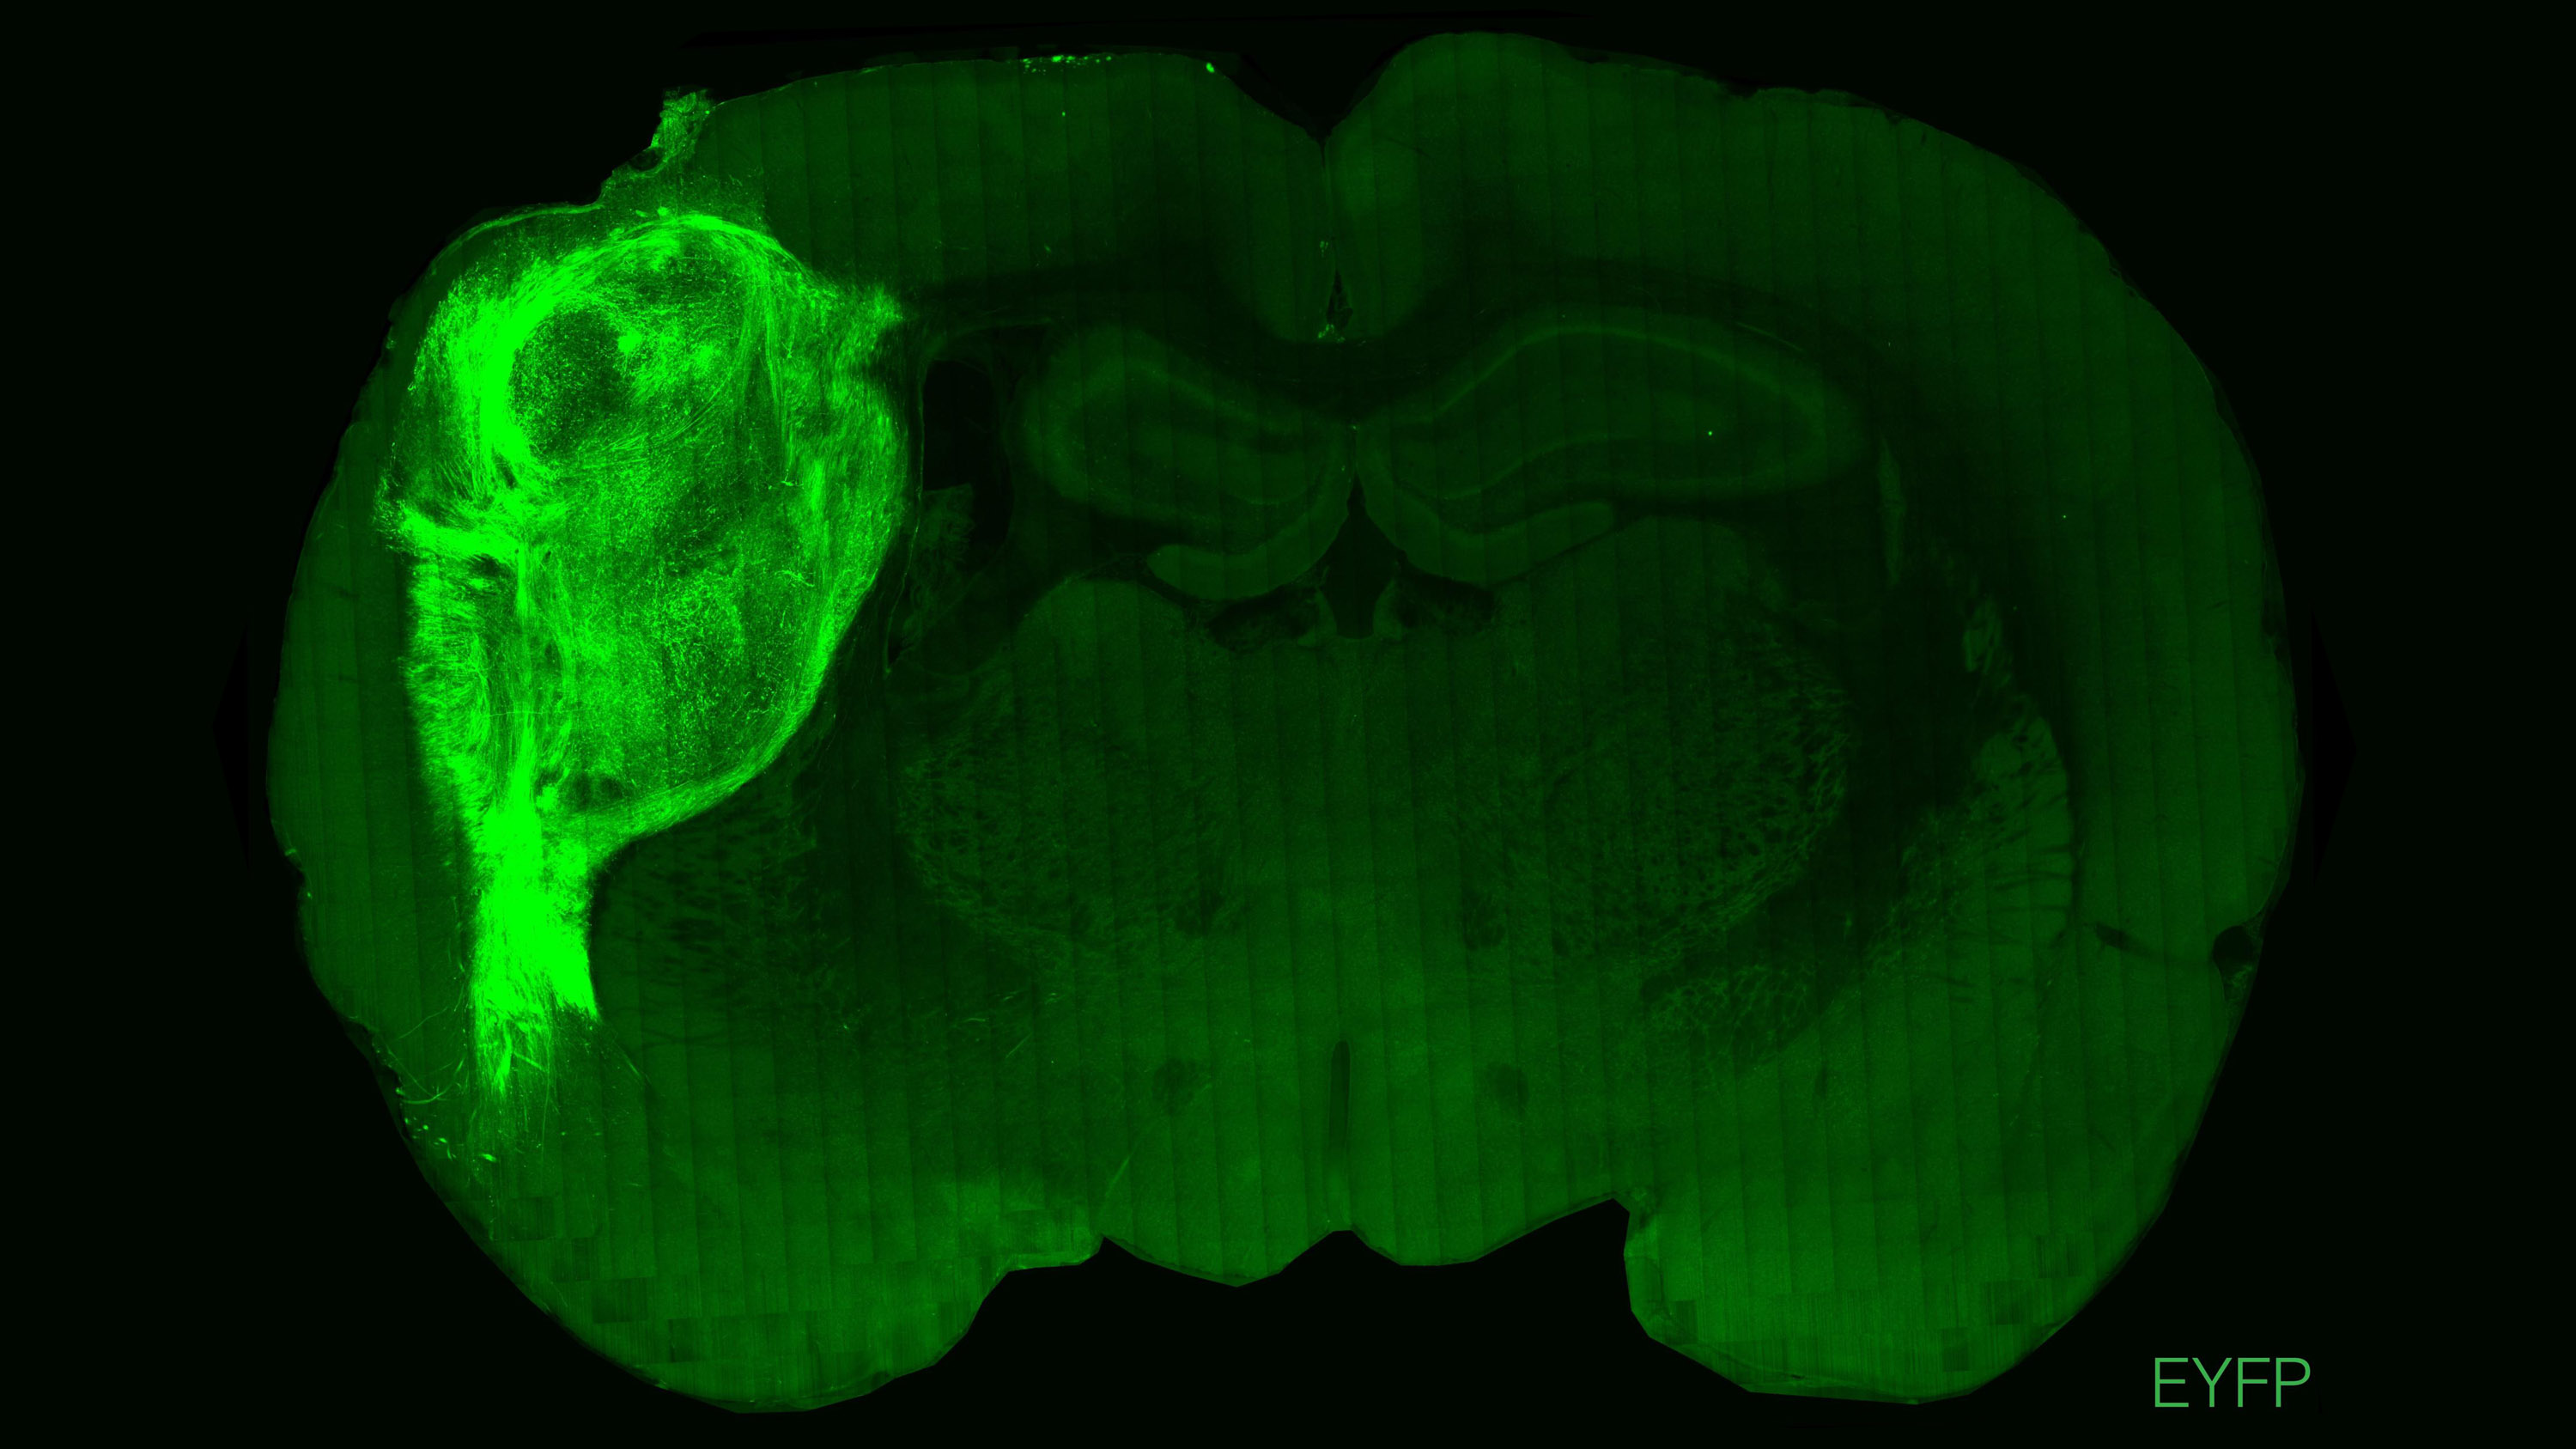 Human brain cells transplanted into baby rats' brains grow and form  connections | MIT Technology Review